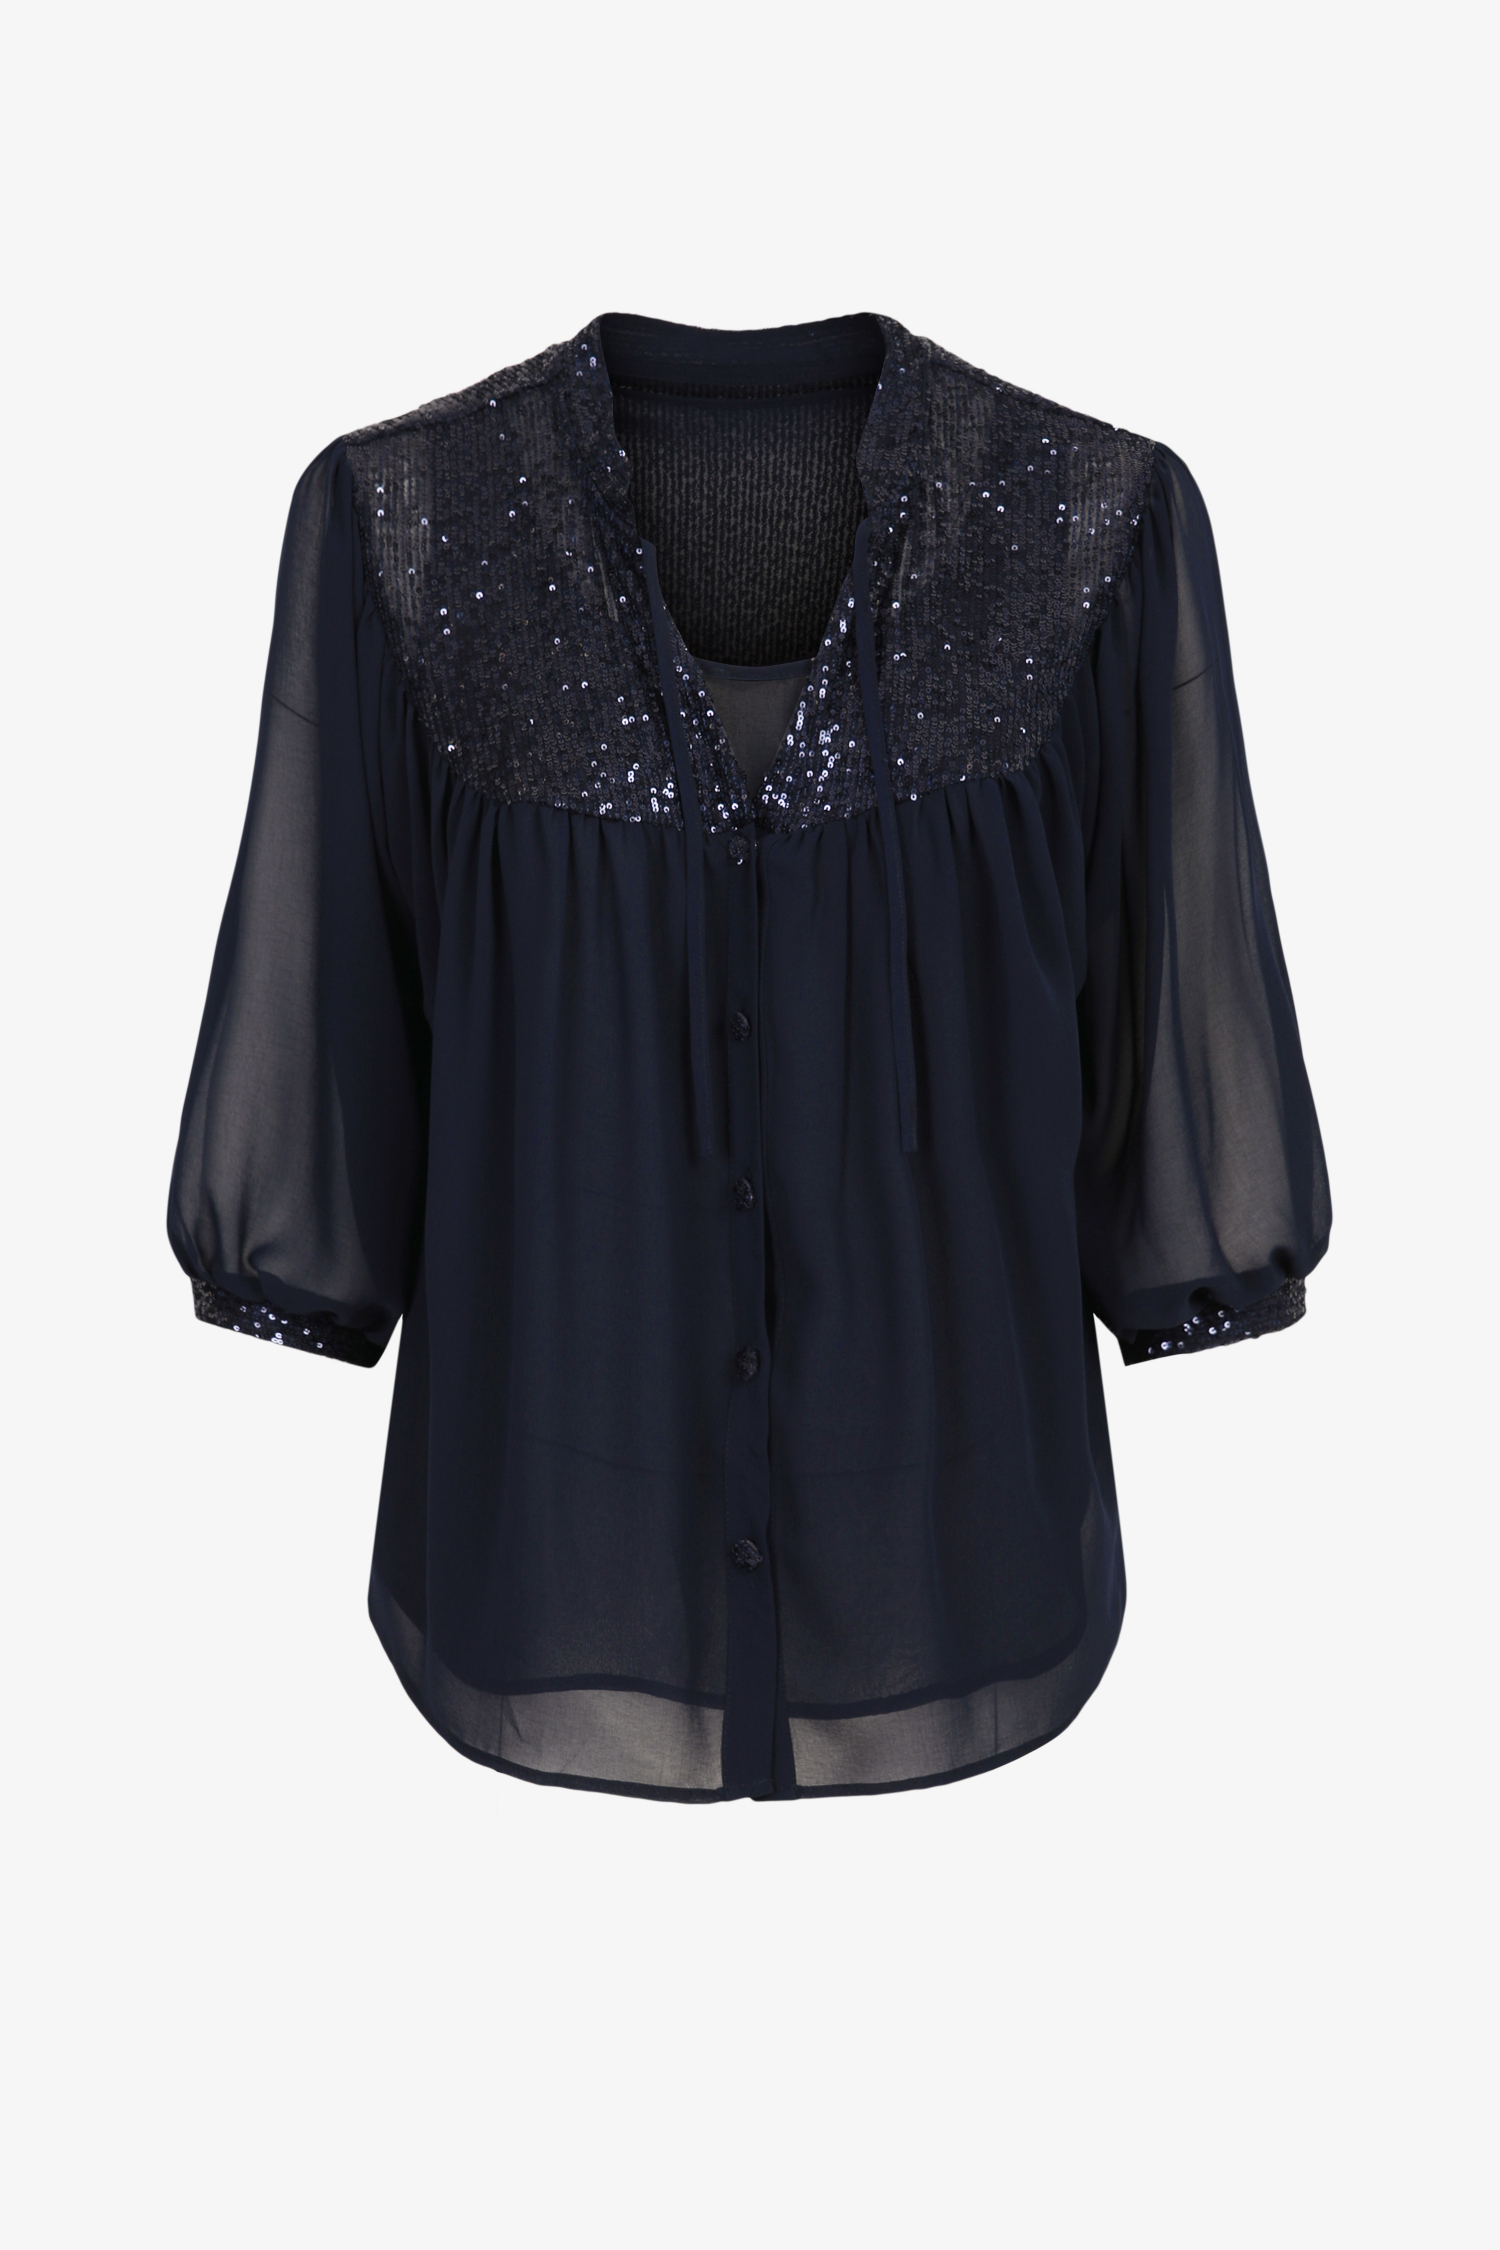 Shirt in plain veil and sequins